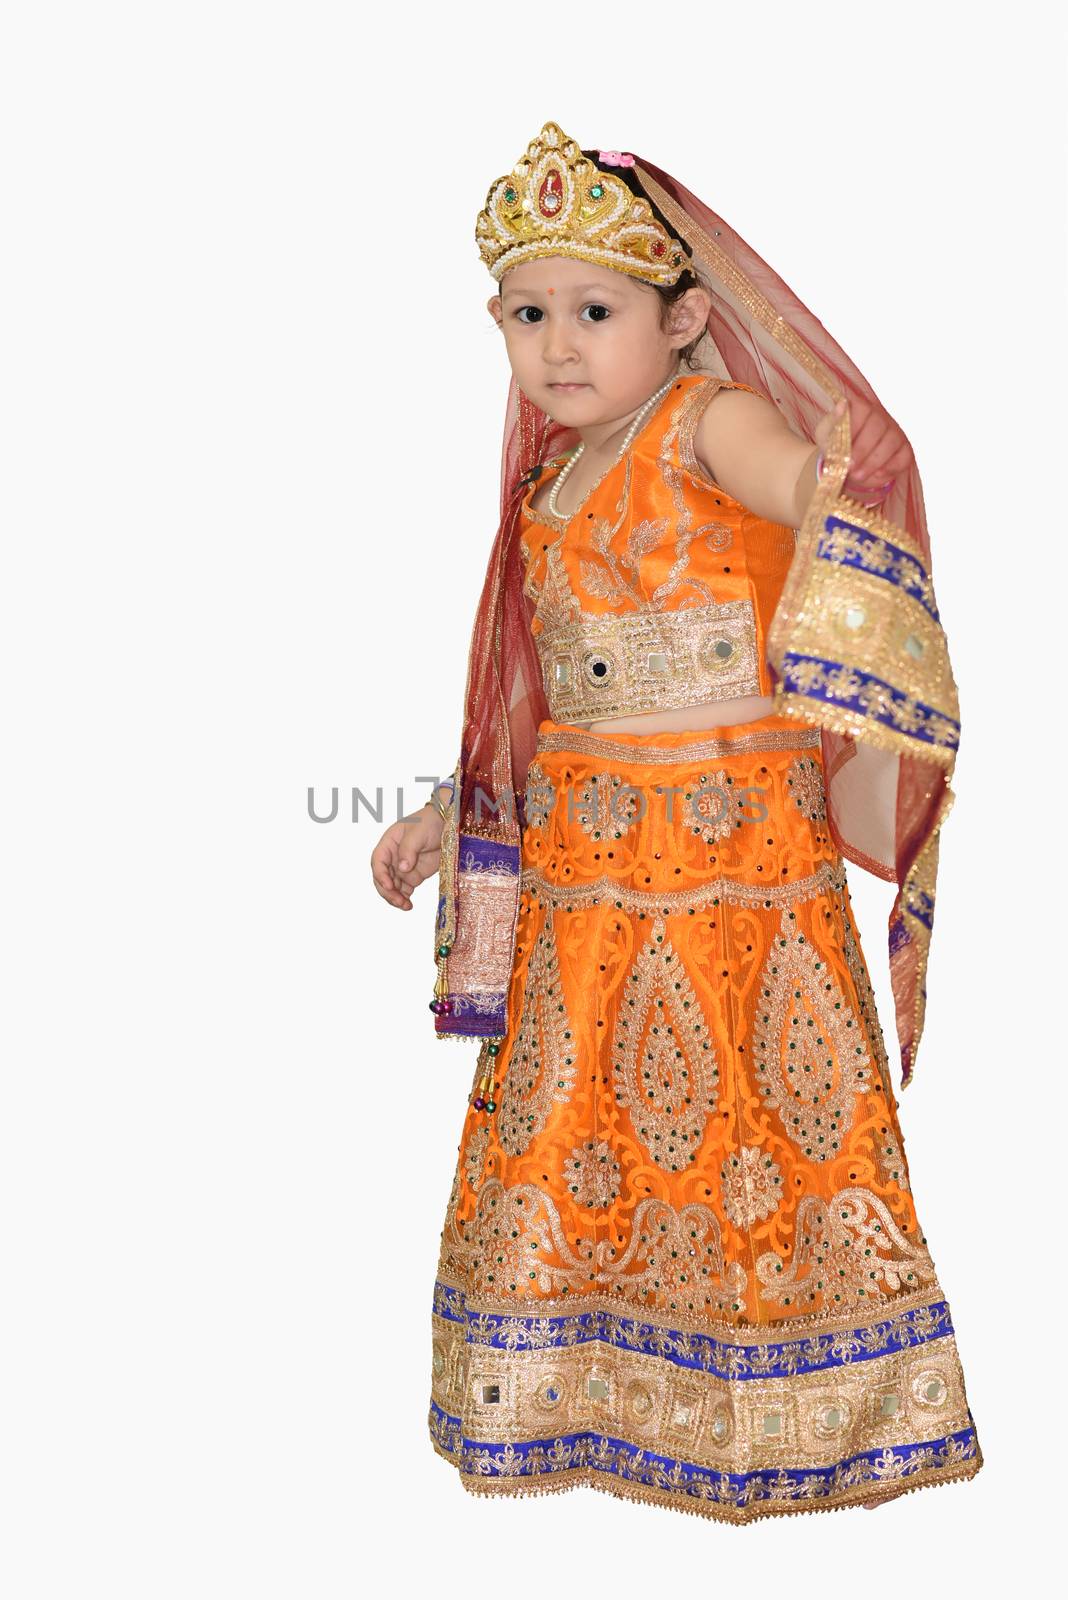 Little girl in Indian traditional dress isolated on white background.